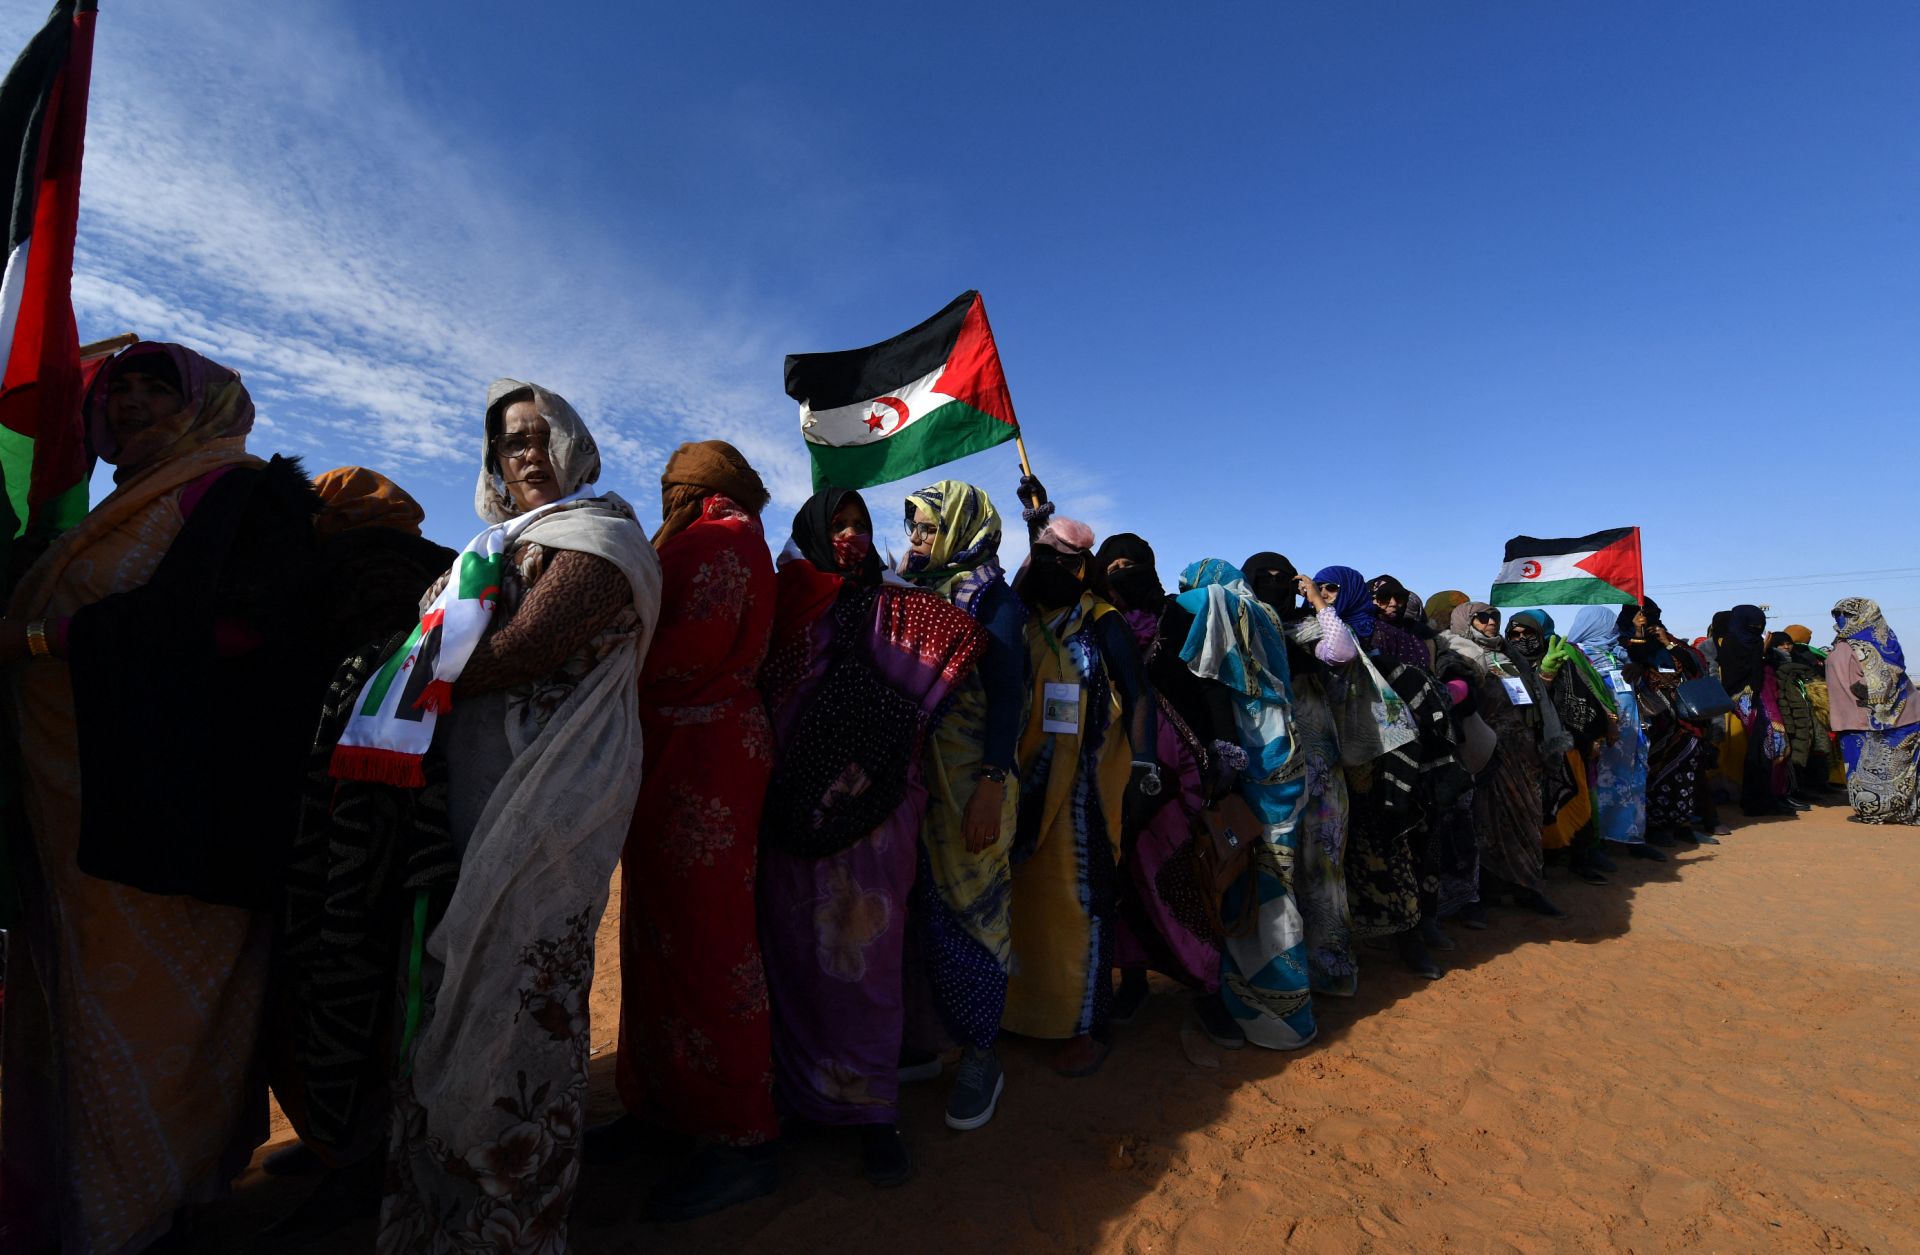 Displaced Sahrawis arrive at the refugee camp of Dakhla, which lies some 170 kilometers southeast of the Algerian city of Tindouf, on Jan. 13, 2023.